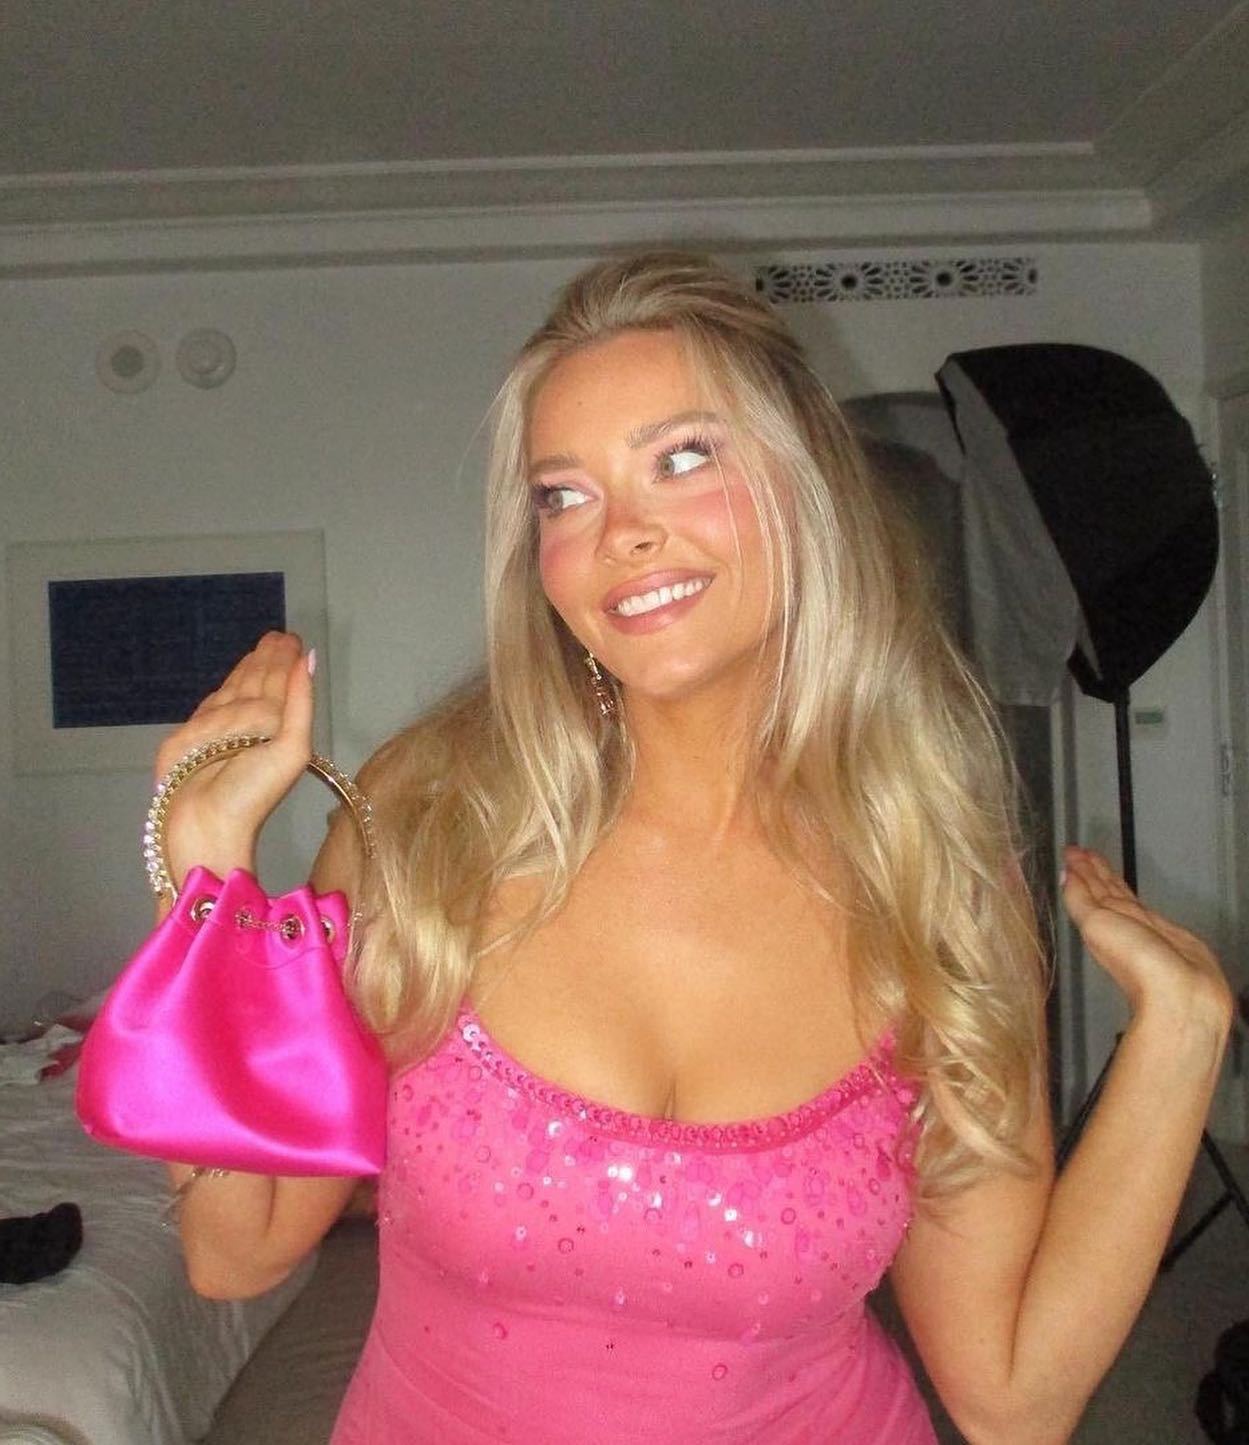 Photos n°3 : Camille Kostek and The Gronk are Barbie and Ken!